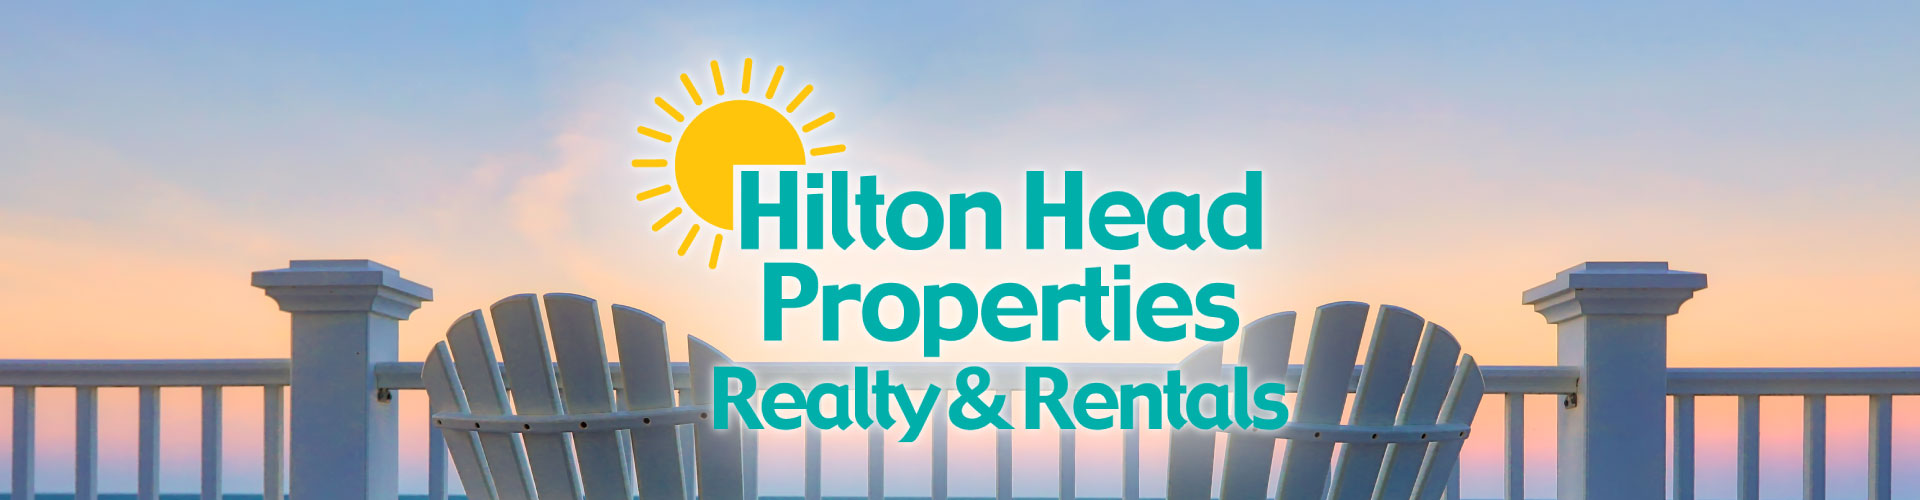 Hilton Head Properties Realty and Rentals Banner